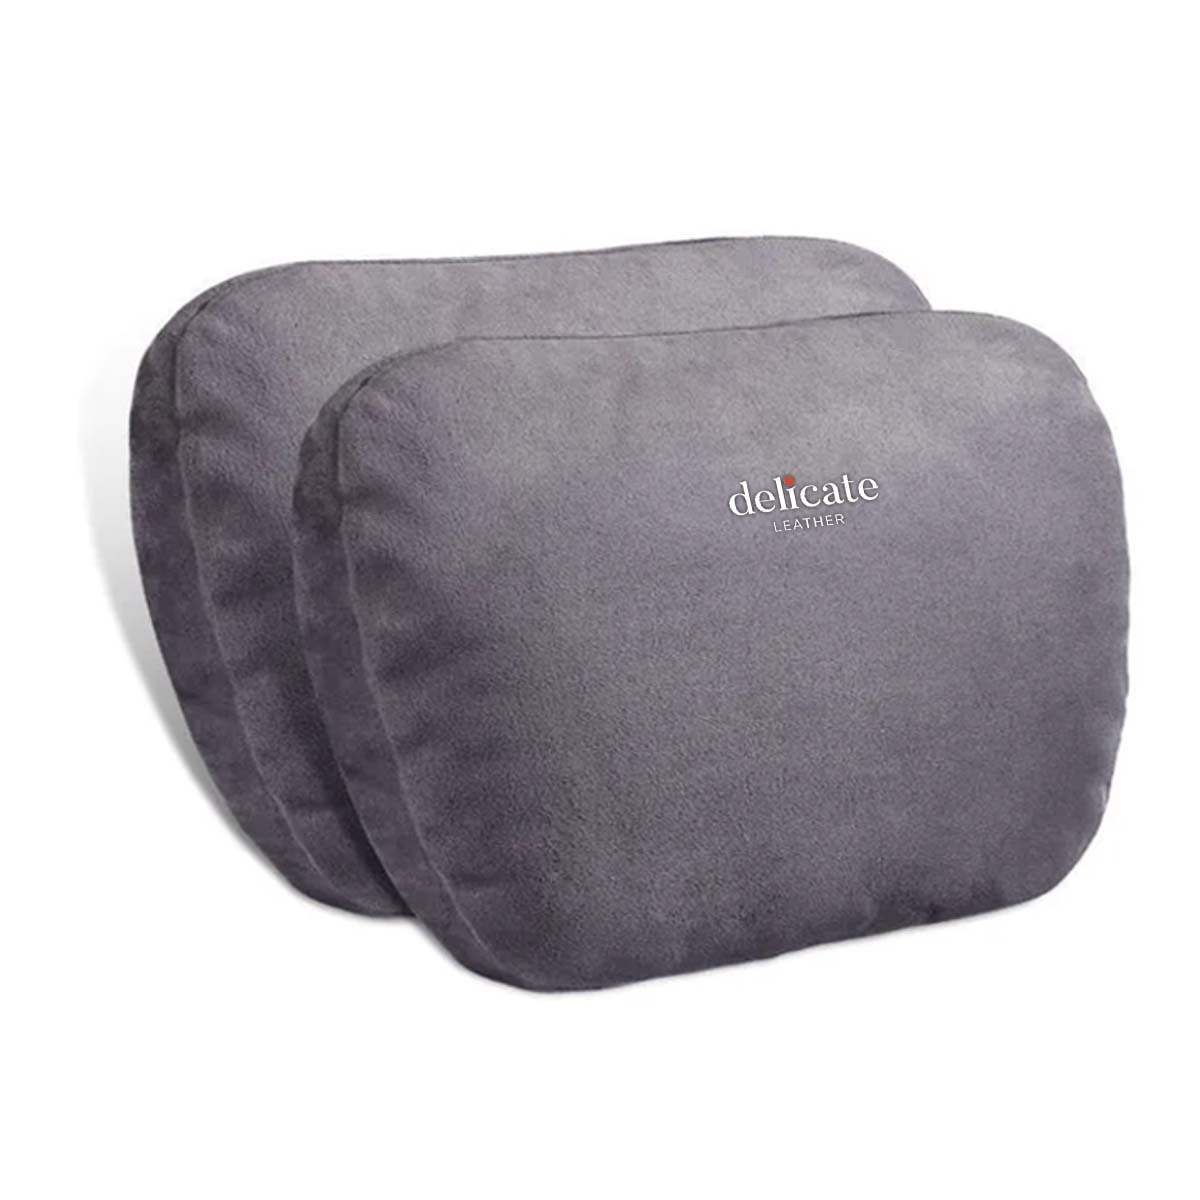 High-Quality Car Headrest Neck Support Seat Class: Soft, Universal, and Adjustable Car Pillow Neck Rest Cushion for Superior Comfort